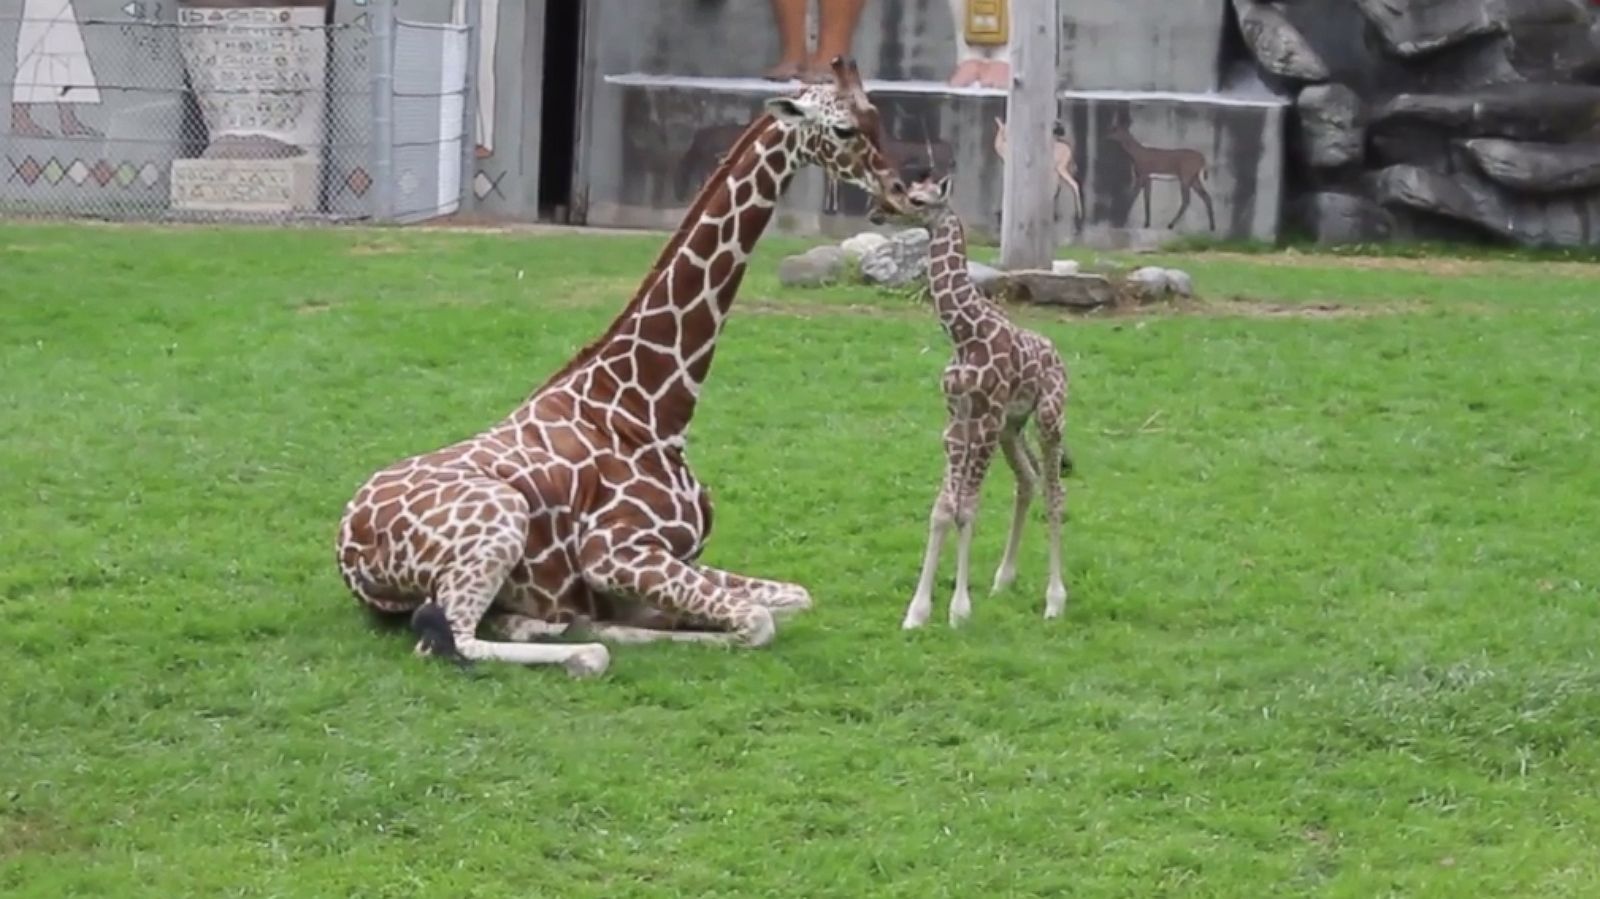 baby giraffe pictures